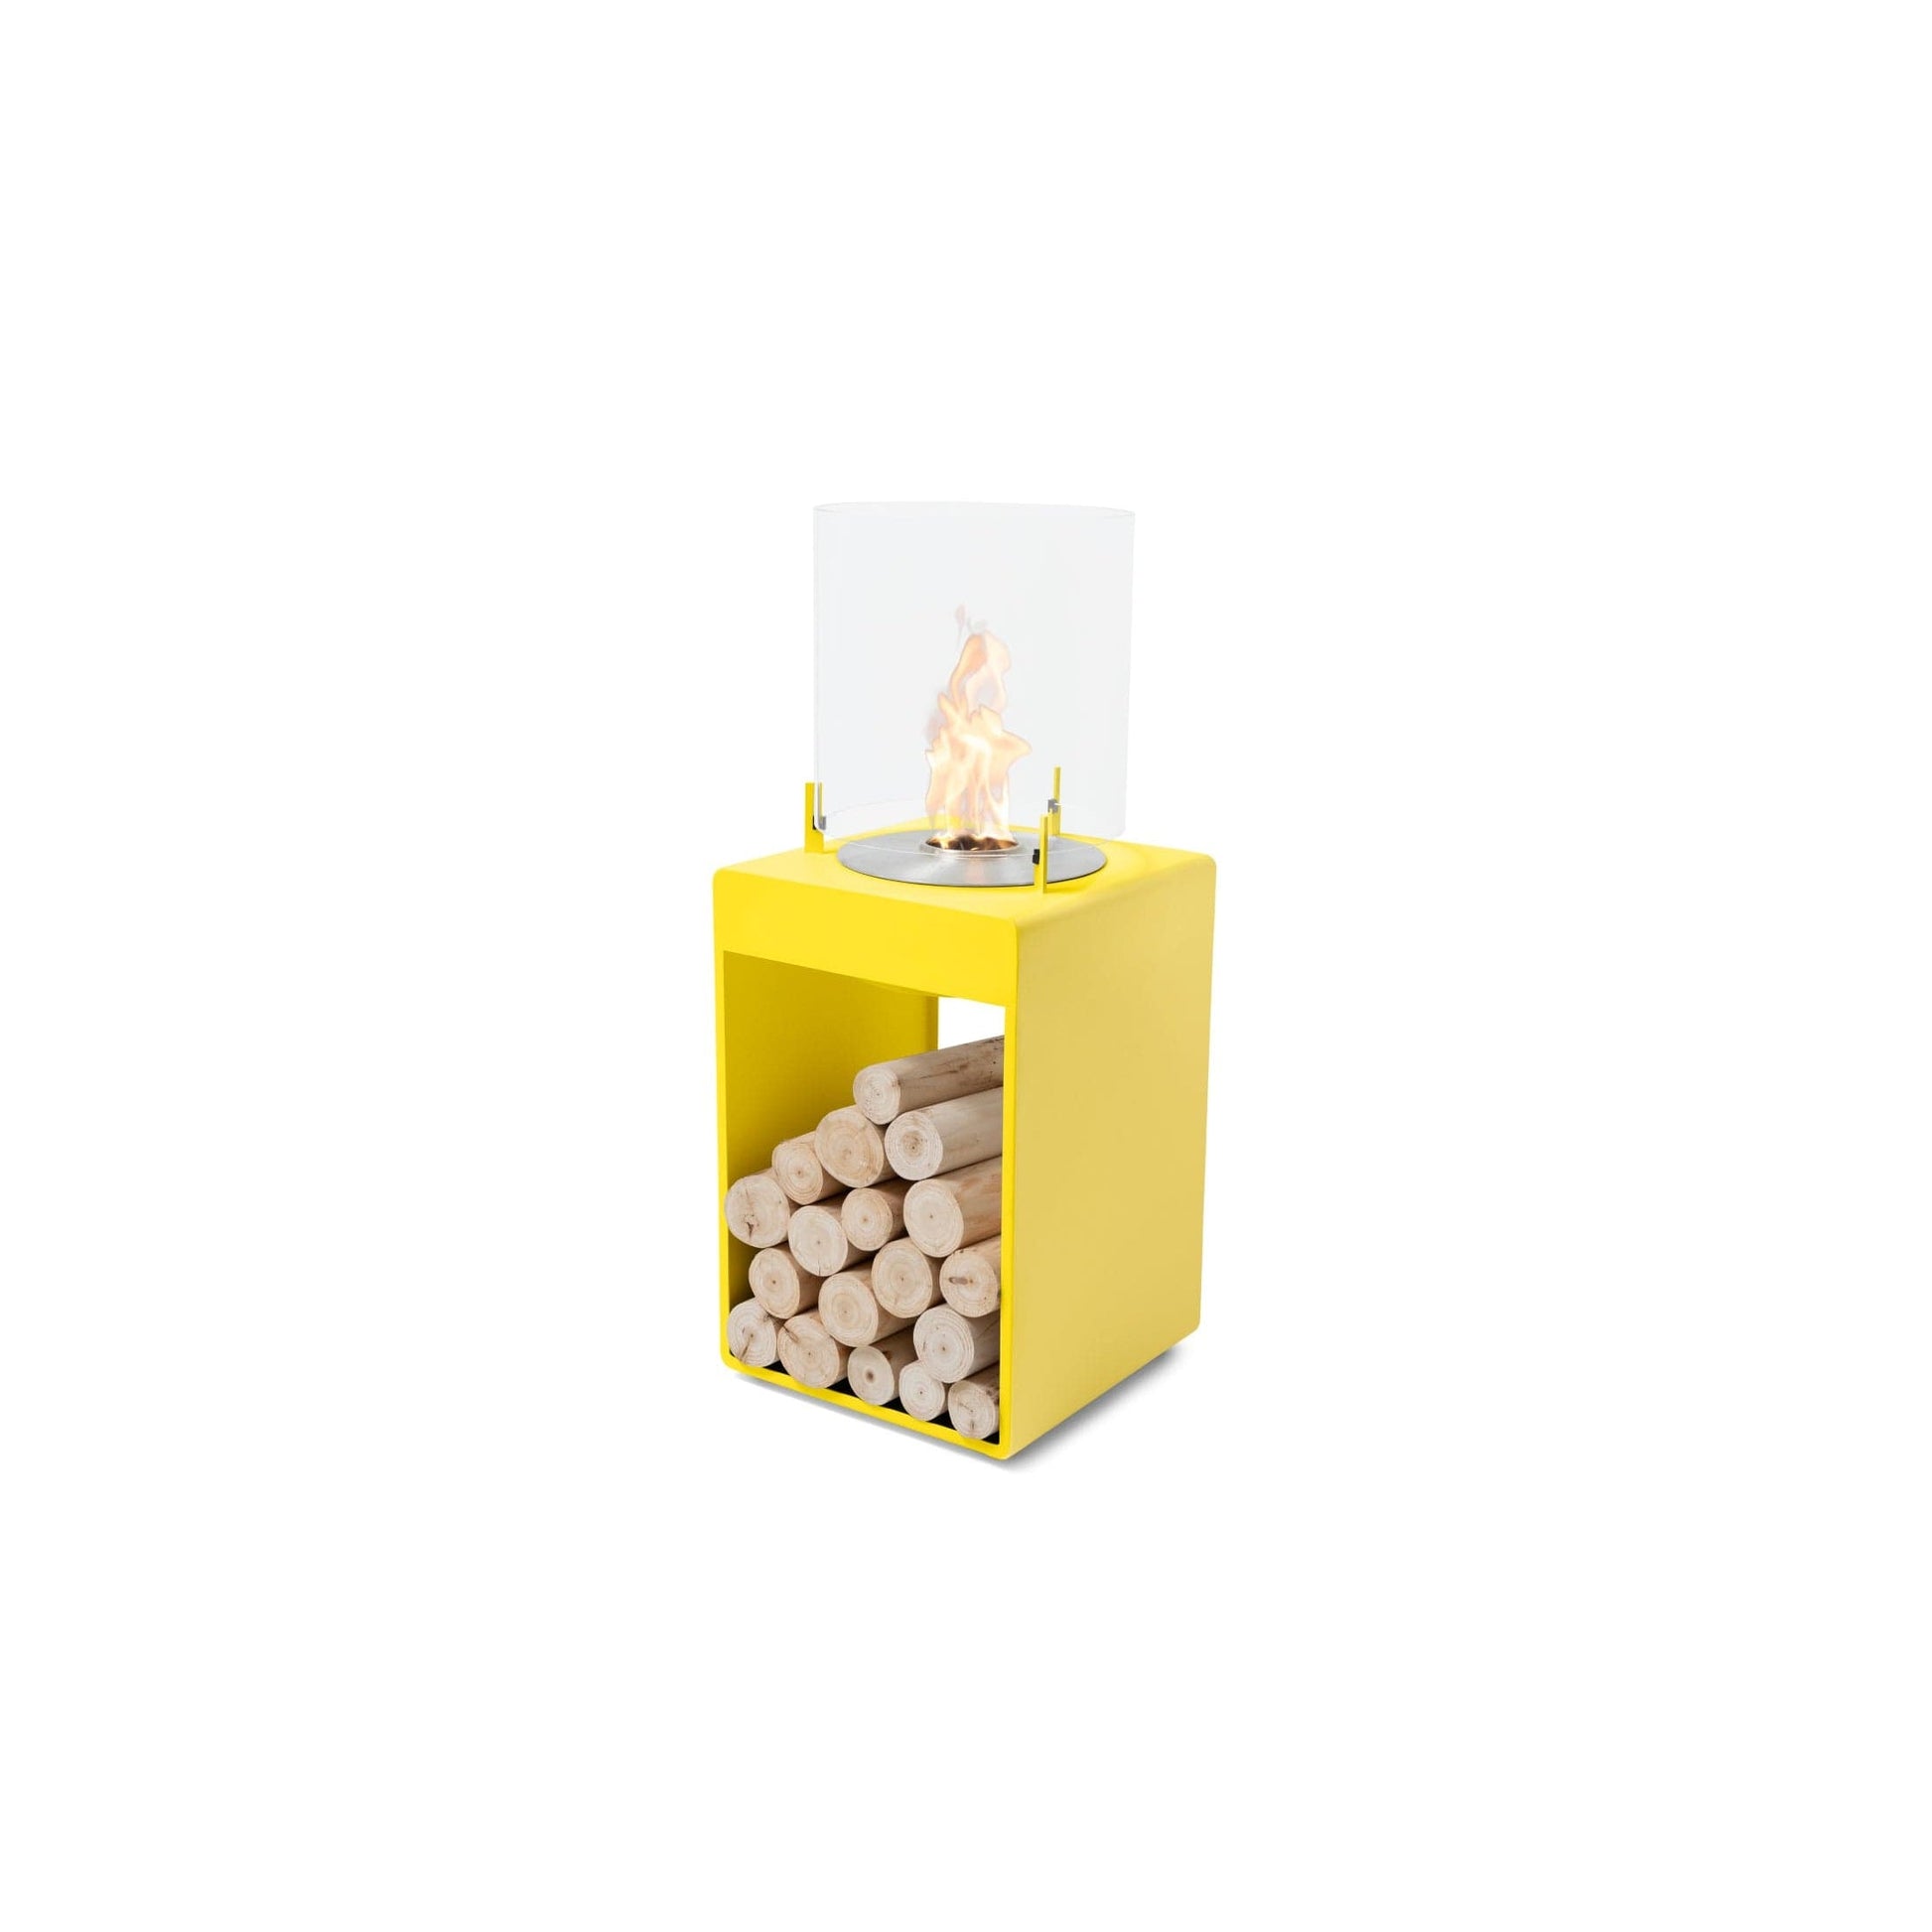 EcoSmart Fire POP 3T 33" Yellow Freestanding Designer Fireplace with Stainless Steel Burner by MAD Design Group